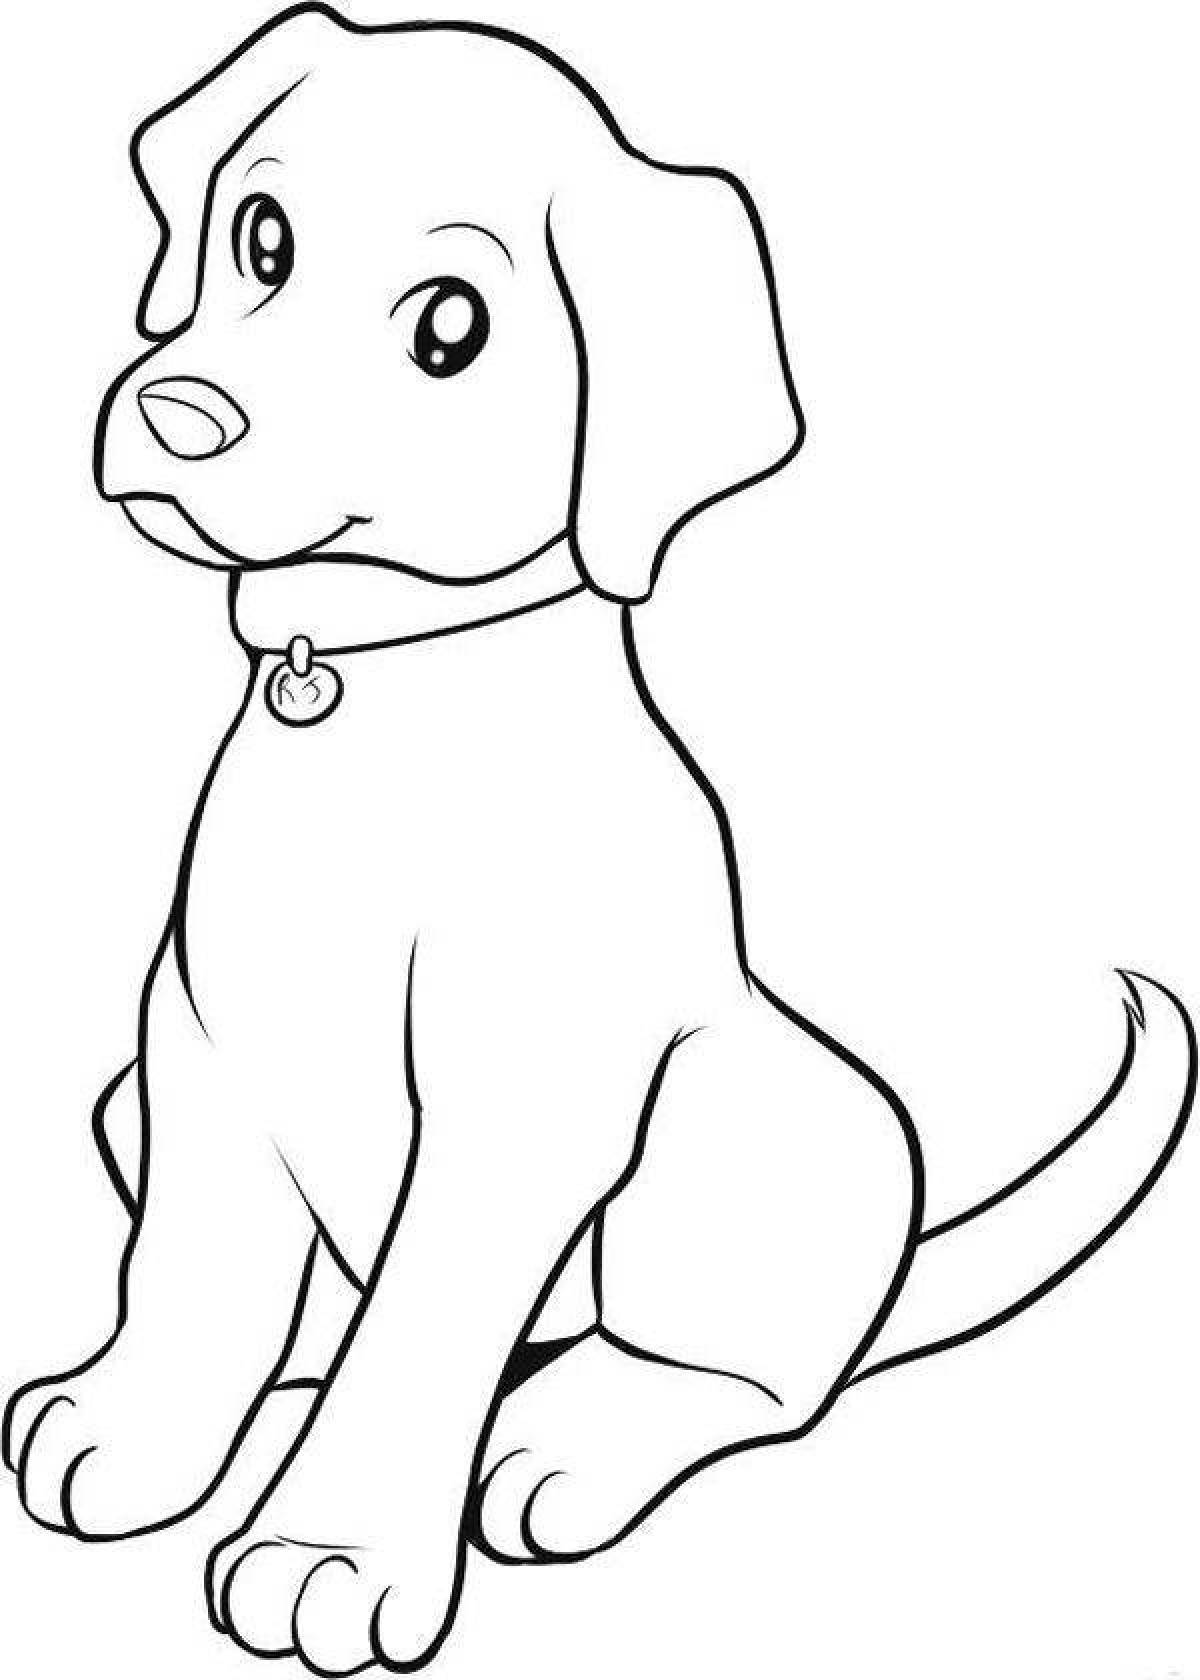 Coloring page of a sociable dog